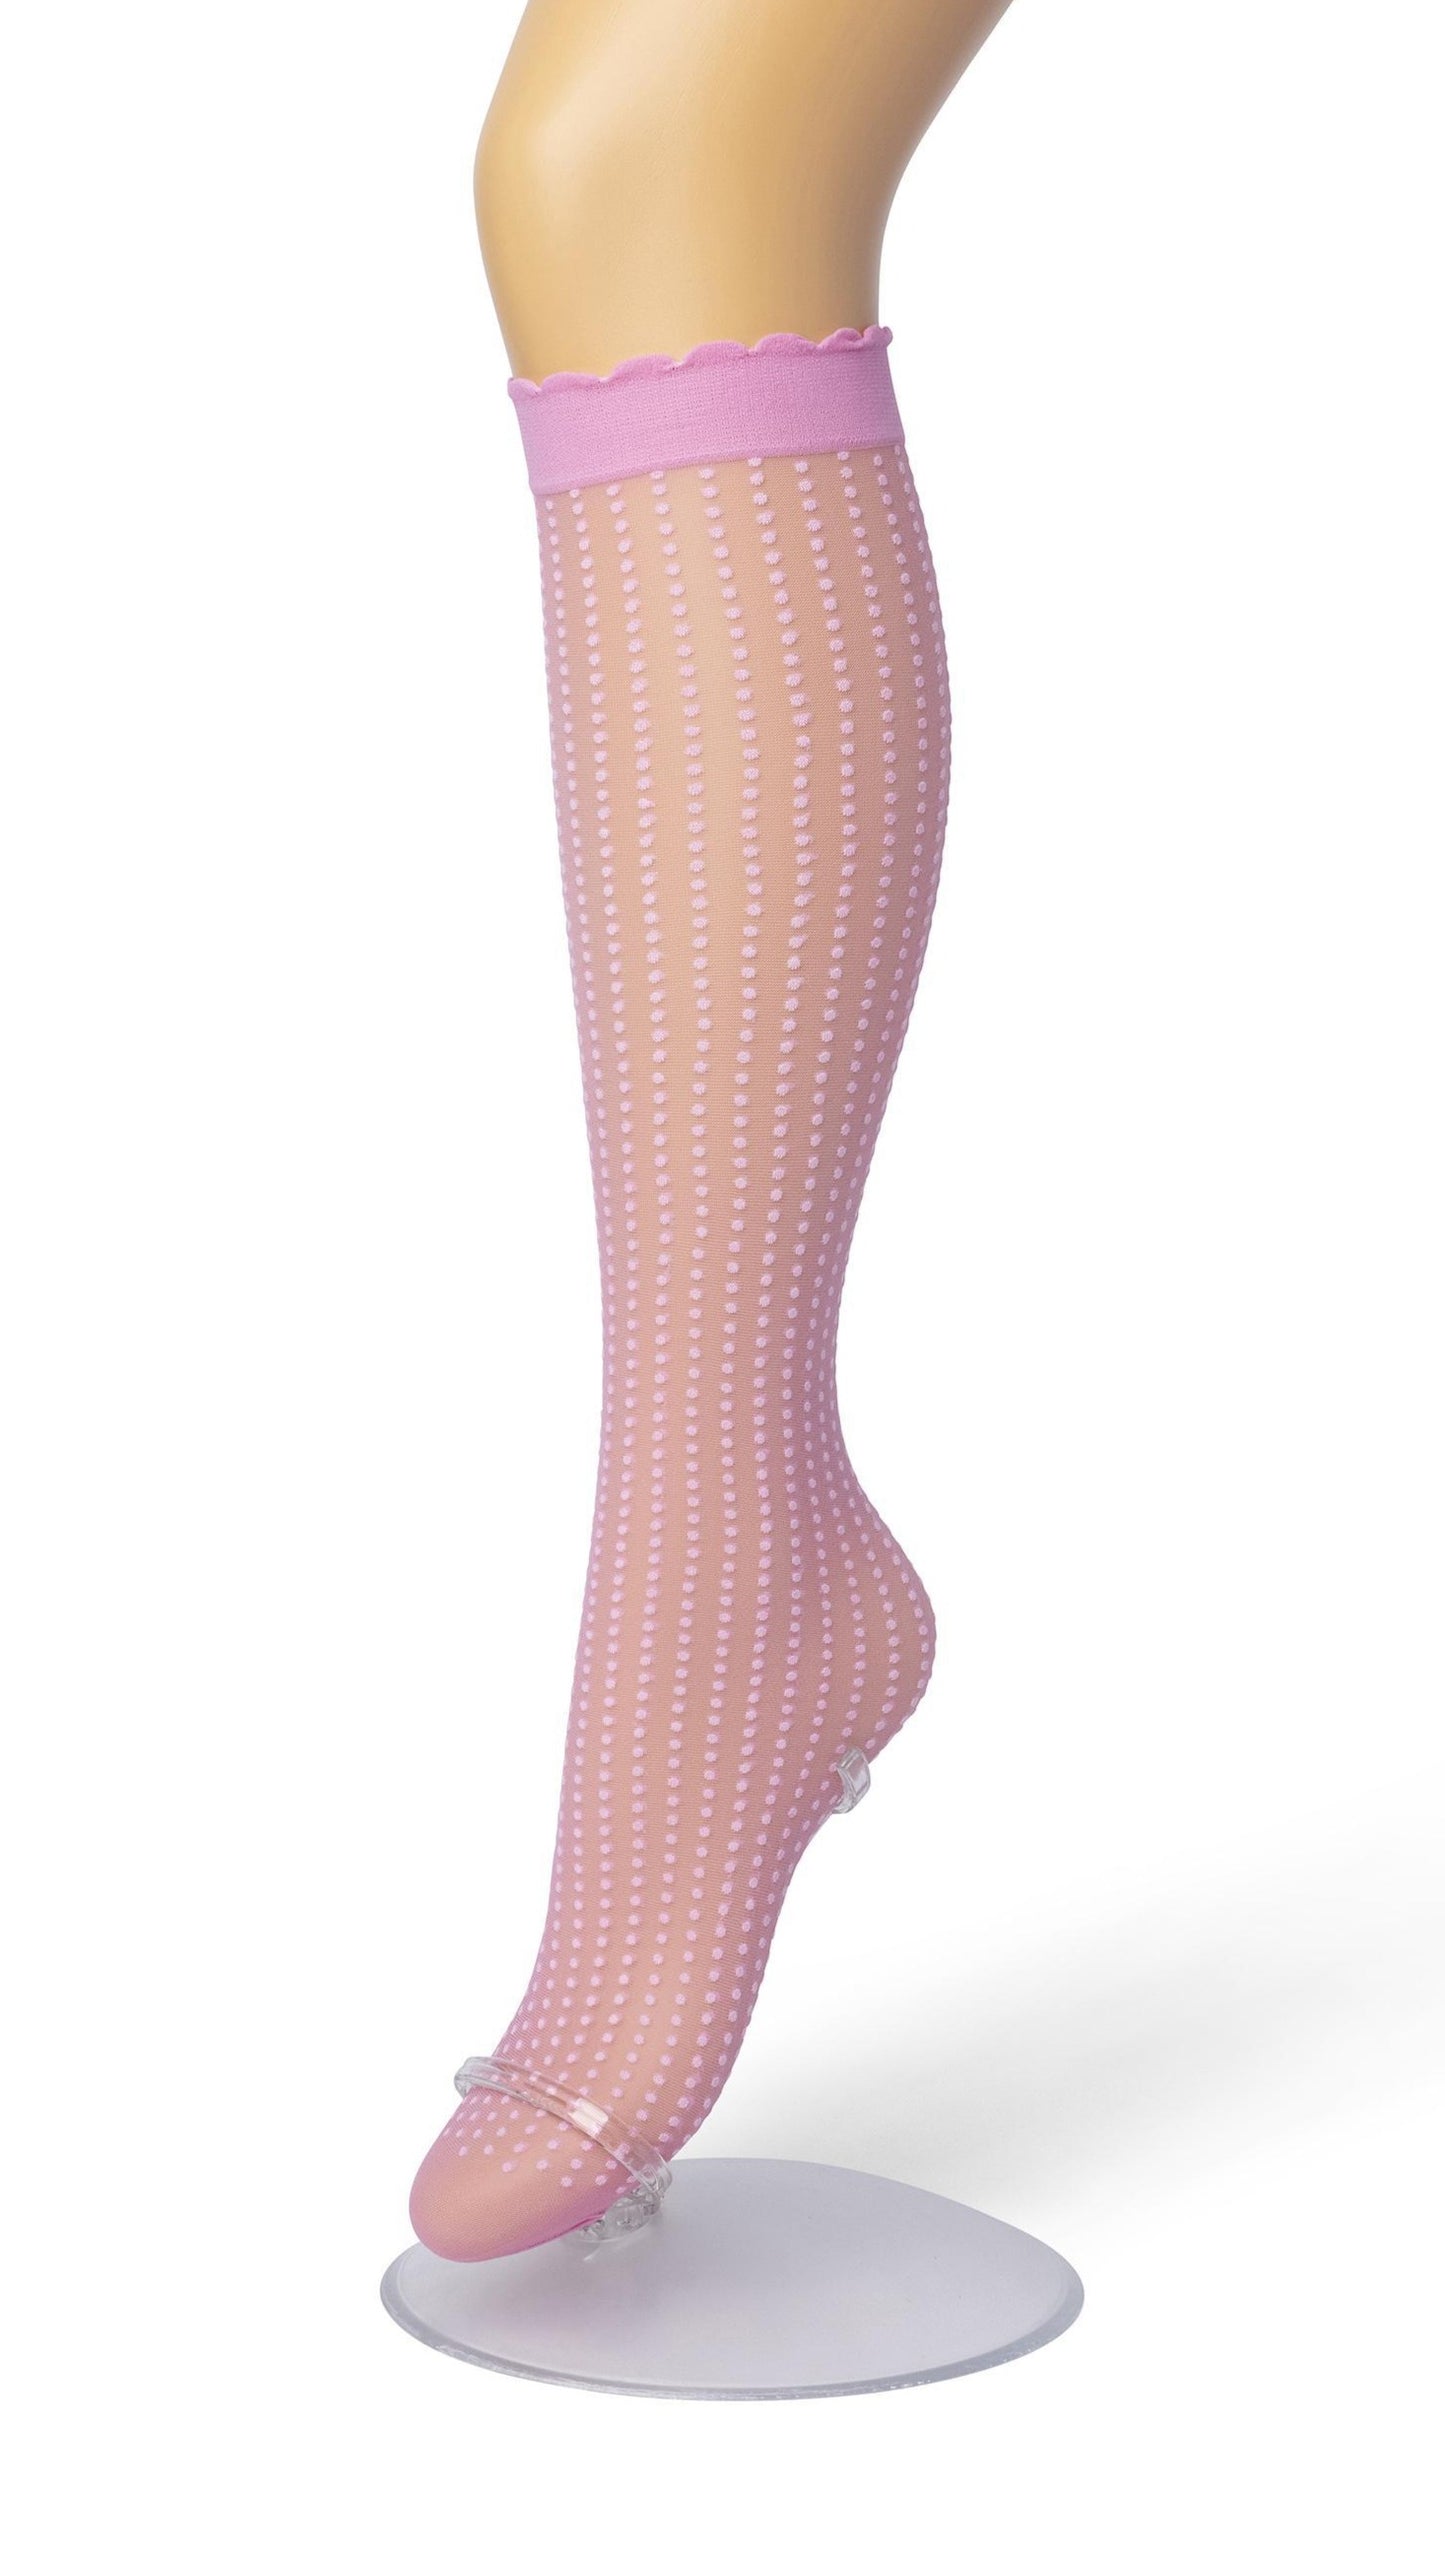 Bonnie Doon Batik Dots - Light pink sheer fashion knee-high socks with a dotted vertical stripe pattern, deep comfort cuff with scalloped edge.